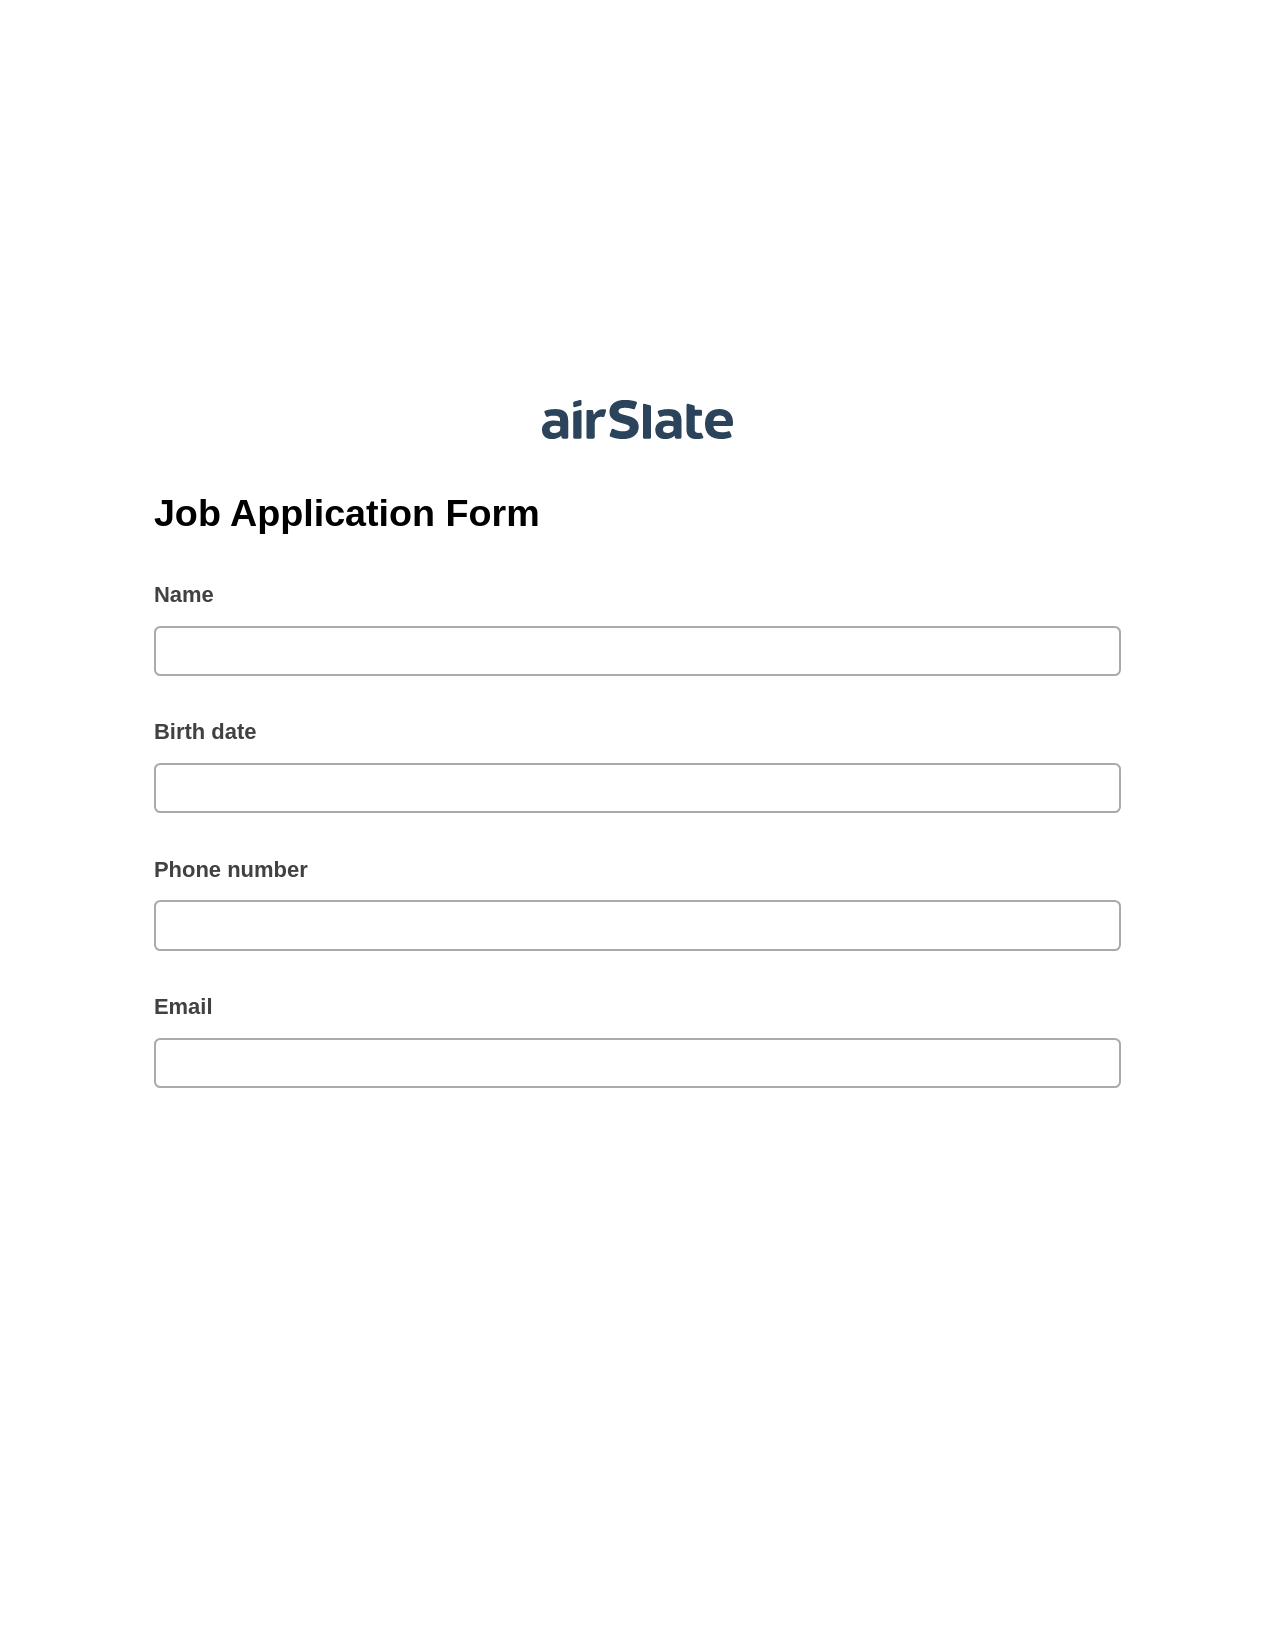 Multirole Job Application Form Pre-fill from Google Sheets Bot, Pre-fill with Custom Data Bot, Export to Salesforce Bot